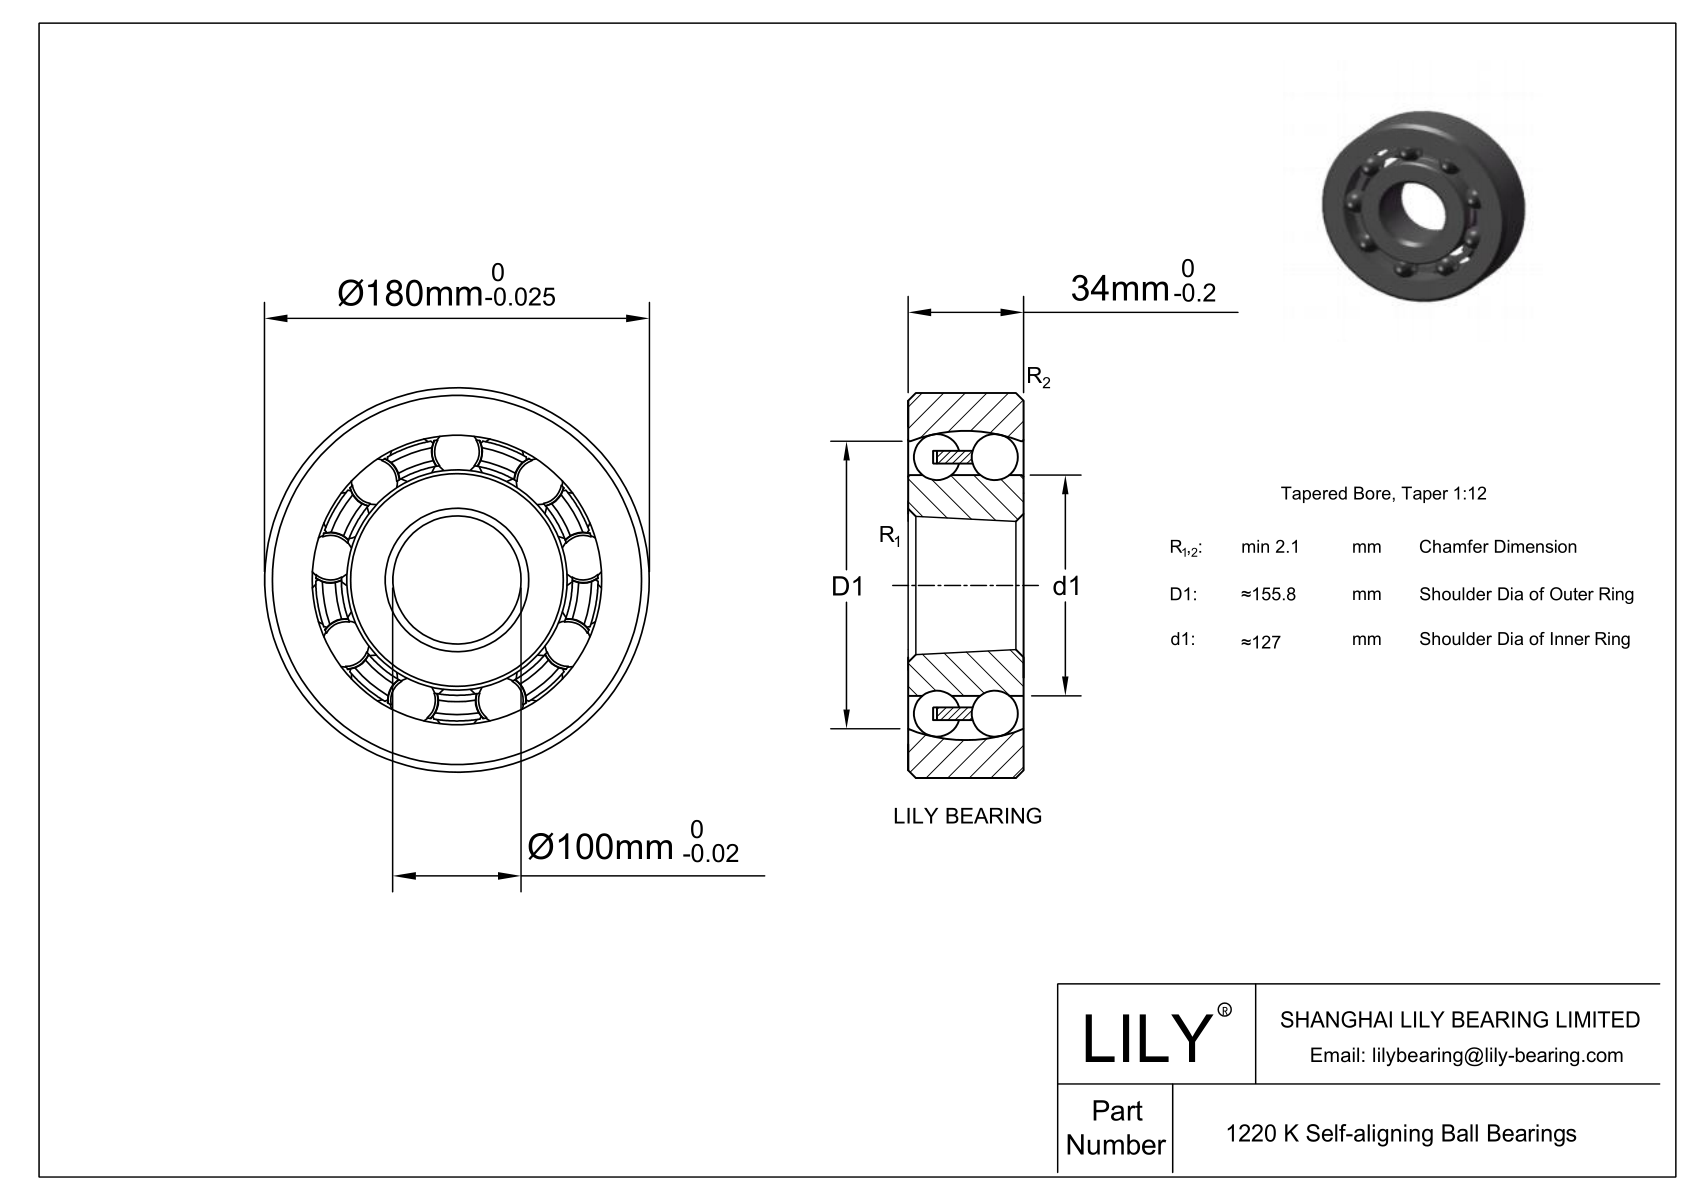 S1220 K Stainless Steel Self Aligning Ball Bearings cad drawing